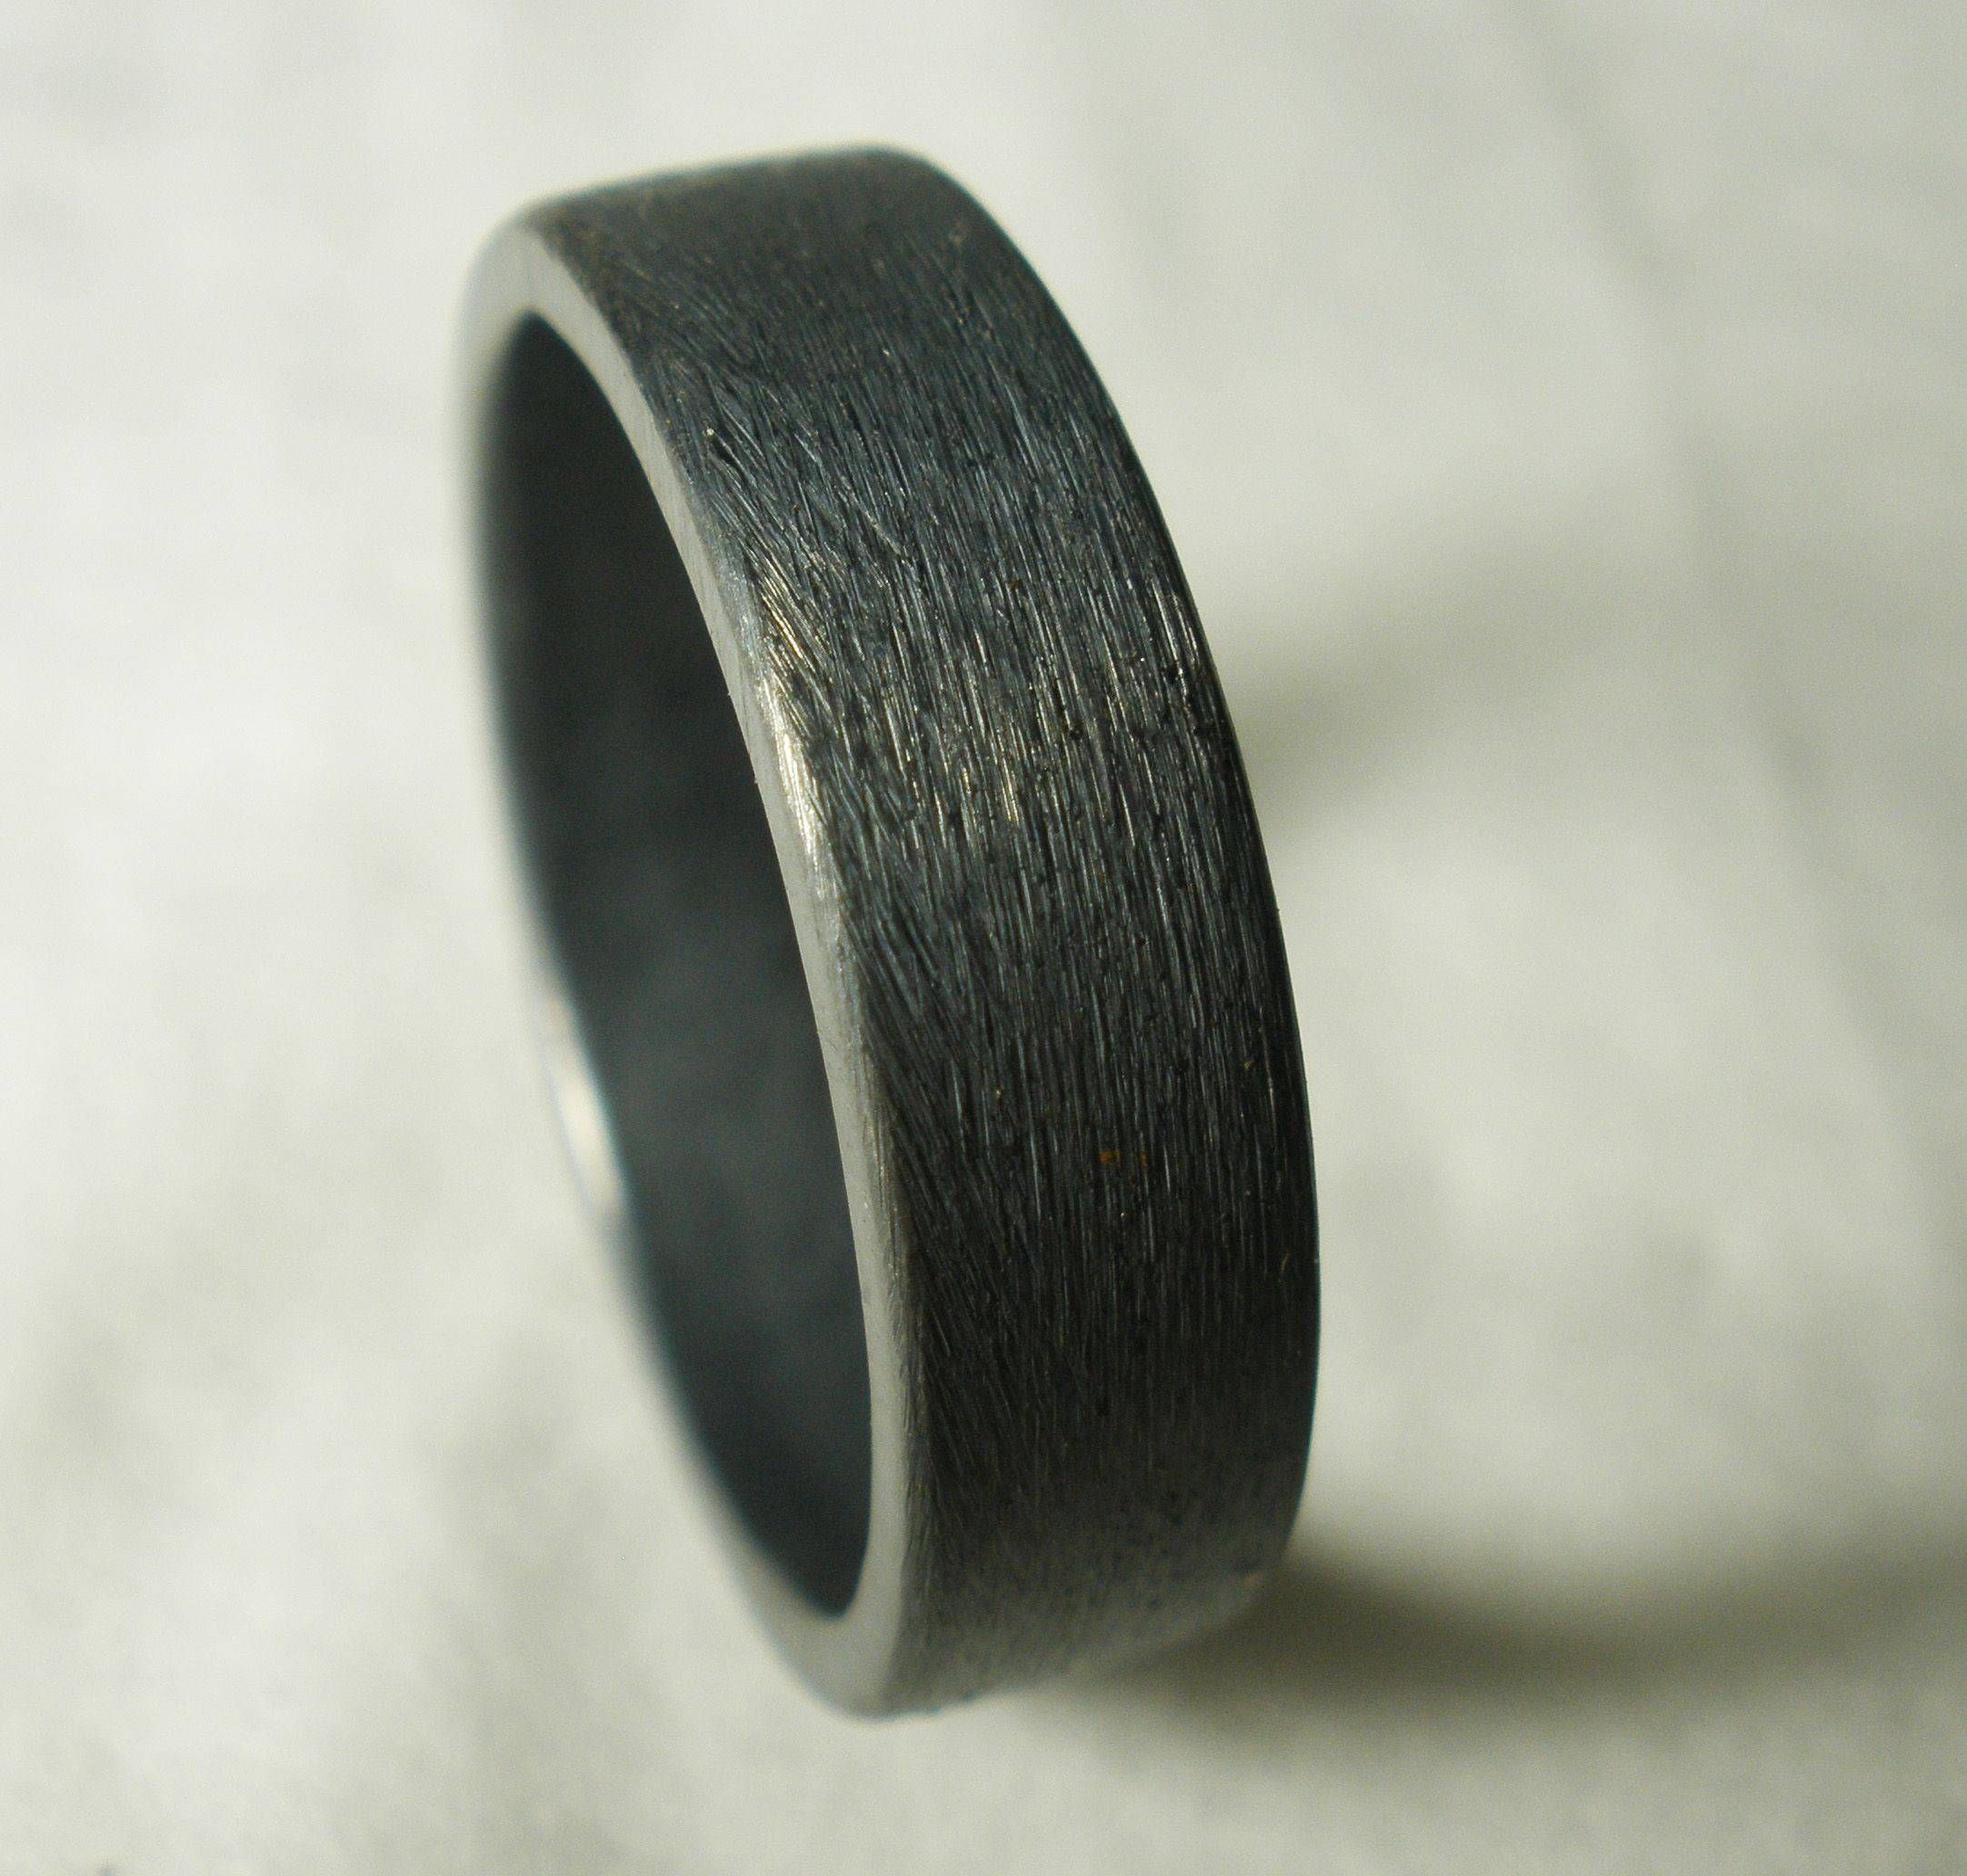 Buy A Hand Made Mens Wedding Ring Rustic Unique Simple Engagement Pertaining To Mens Custom Wedding Rings (View 6 of 15)